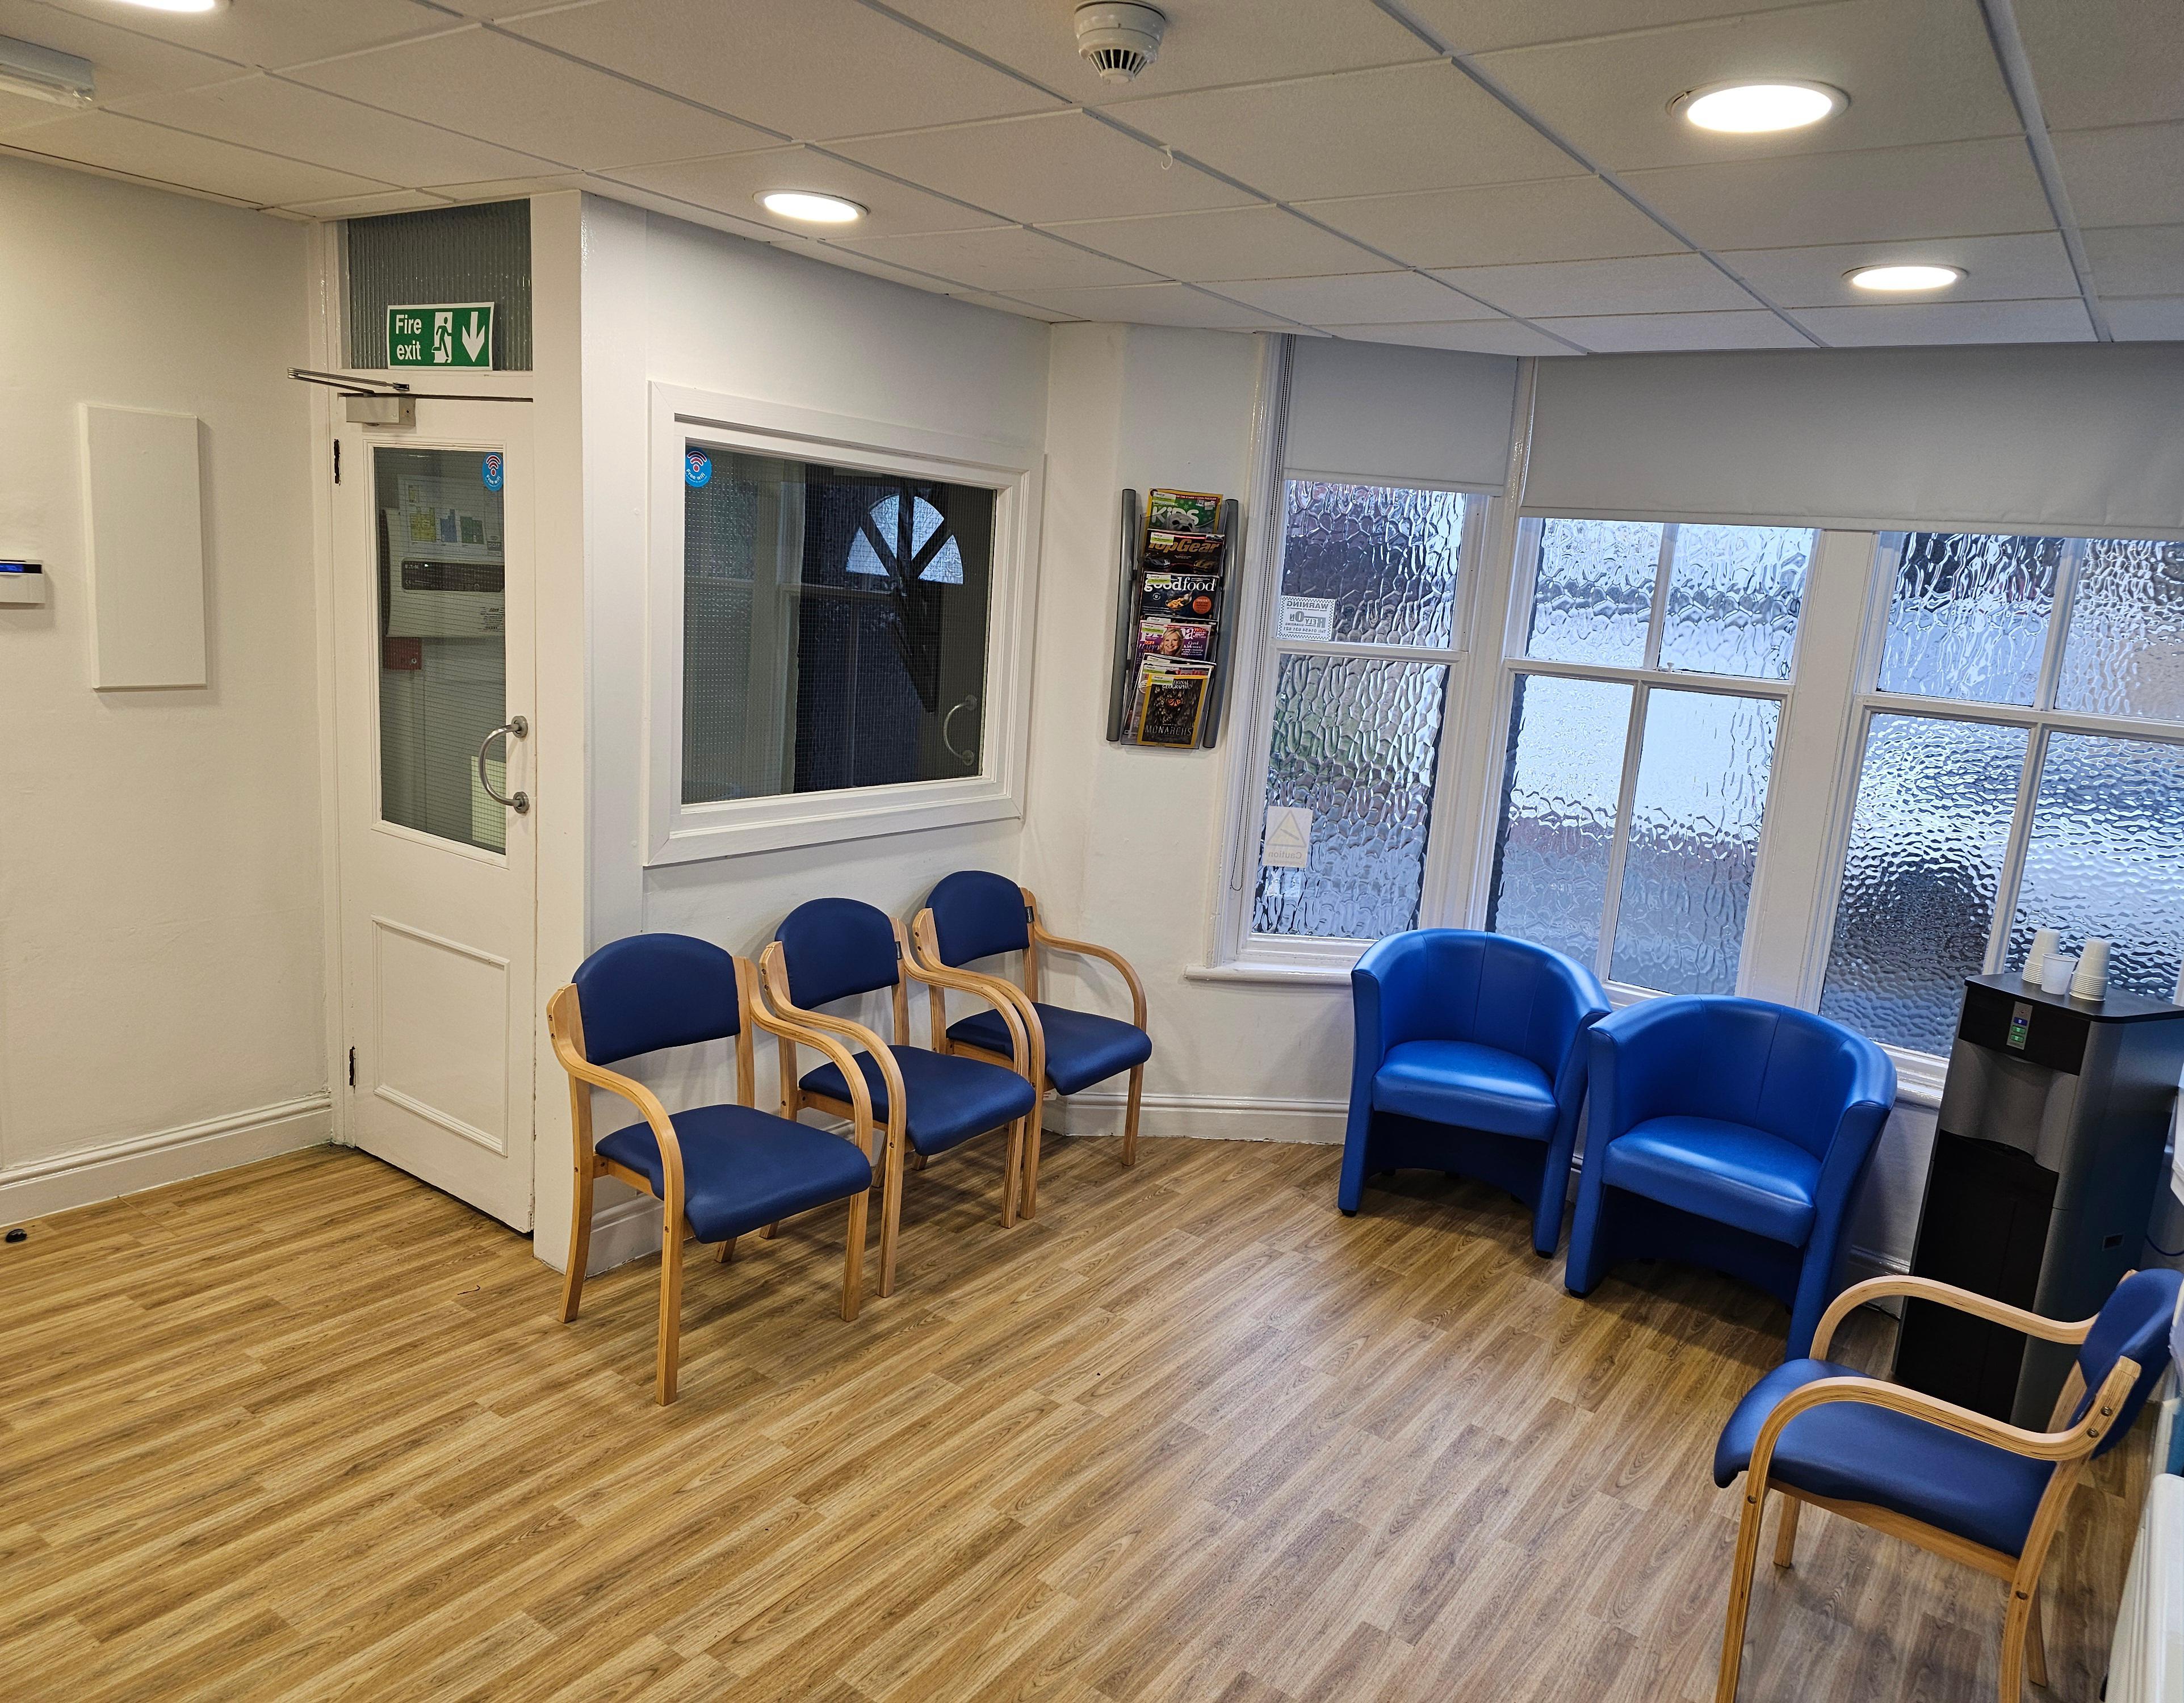 Images Bupa Dental Care Morecambe